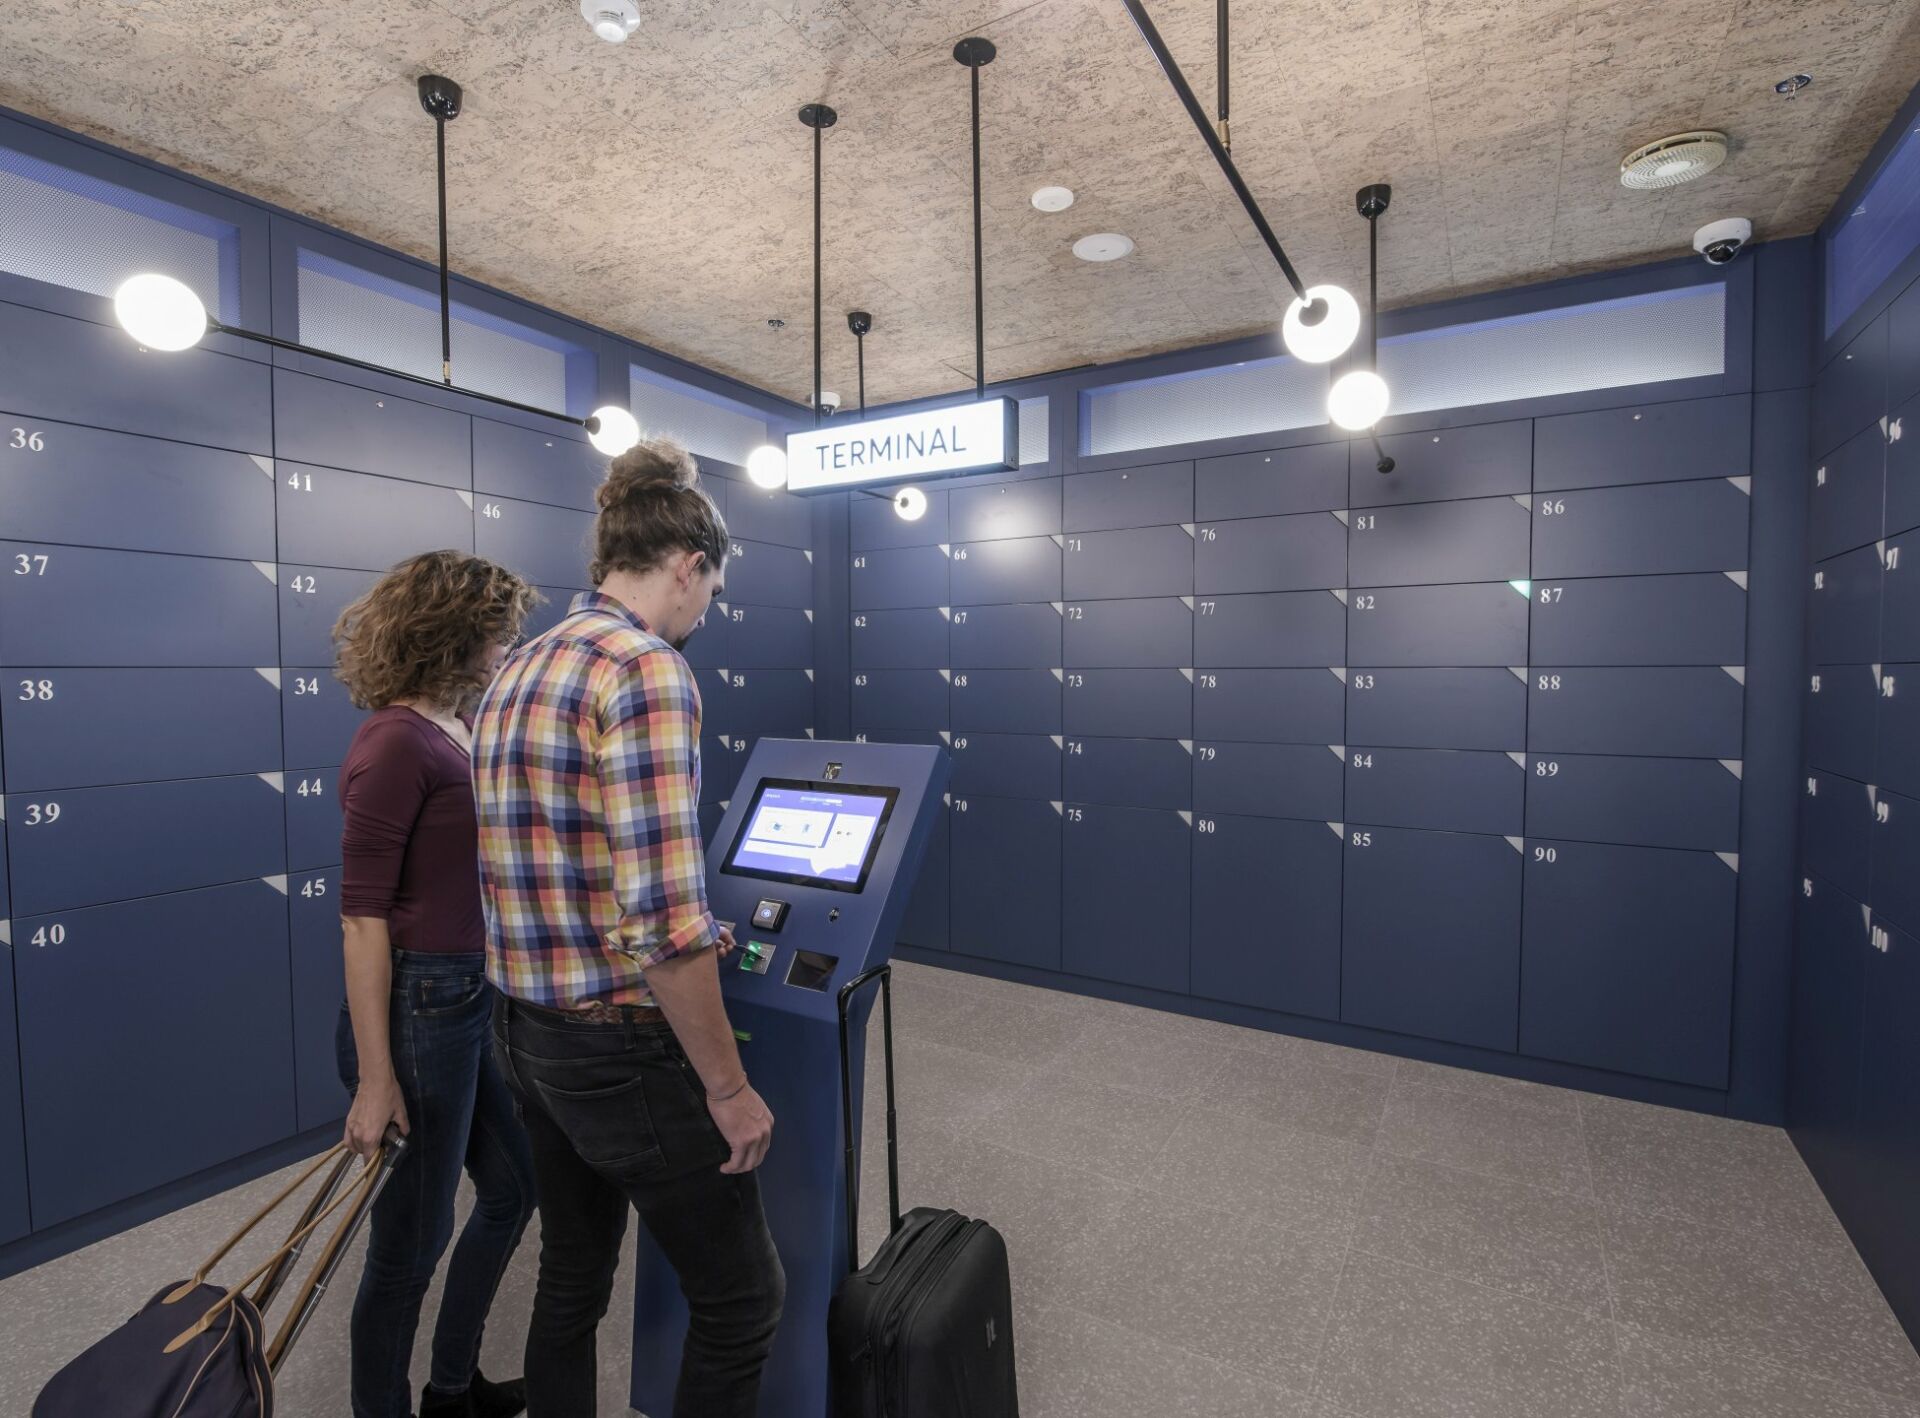 Some of the luggage storages in Budapest are fully automated self-service lockers